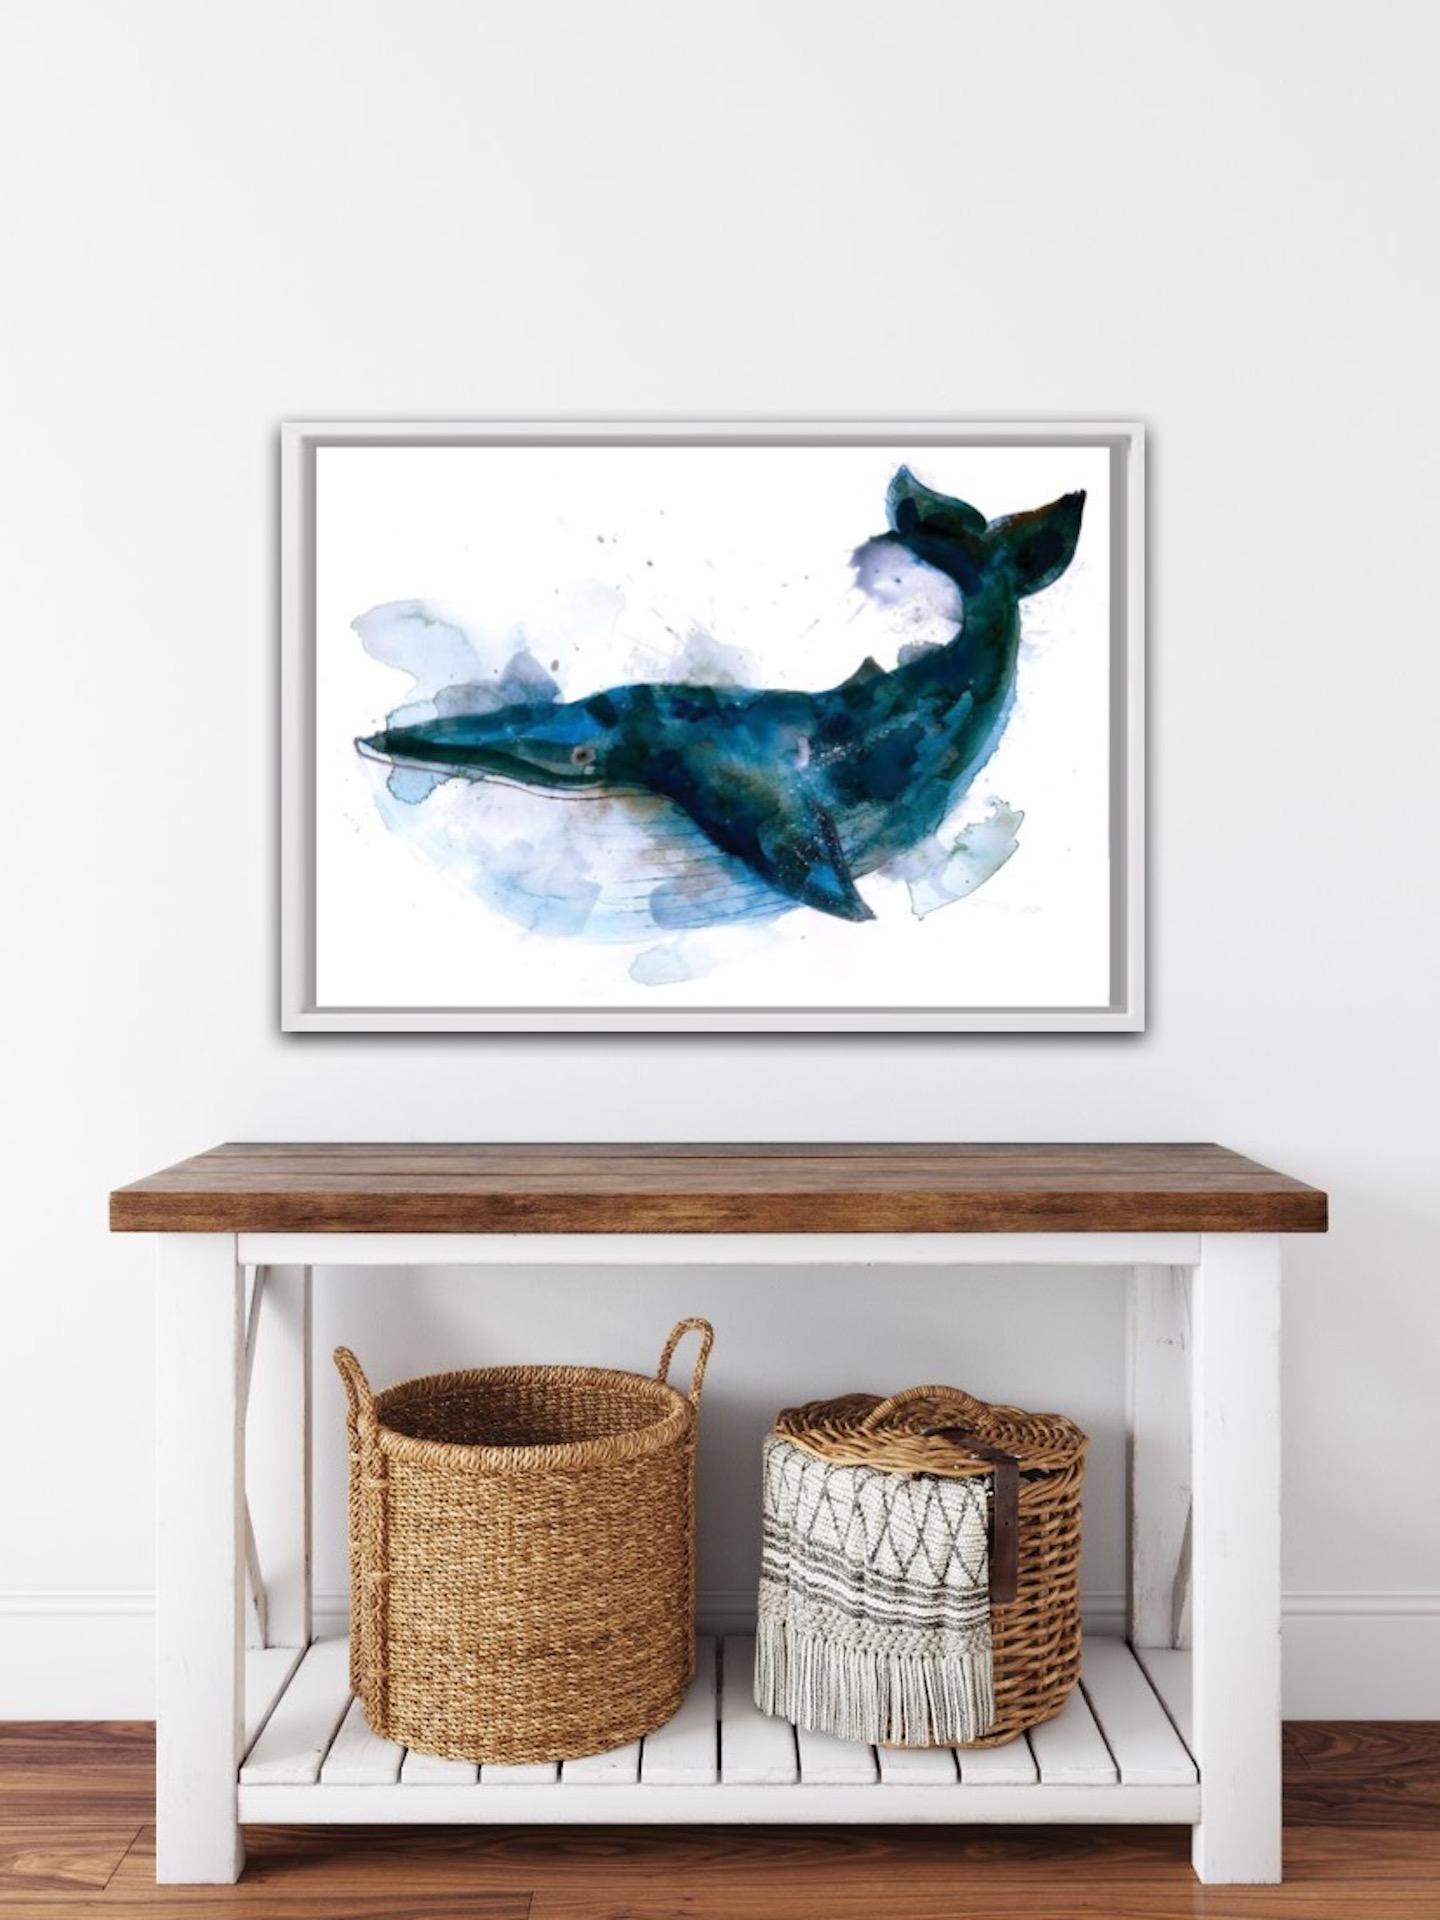 Gavin Dobson
Blue Whale
Limited Edition Print
A four layer CYMK Screen Print on Paper
Edition of 100
Sheet Size: H 50cm x W 70cm 
Sold Unframed
Please note that in situ images are purely an indication of how a piece may look.Blue Whale,

Gavin